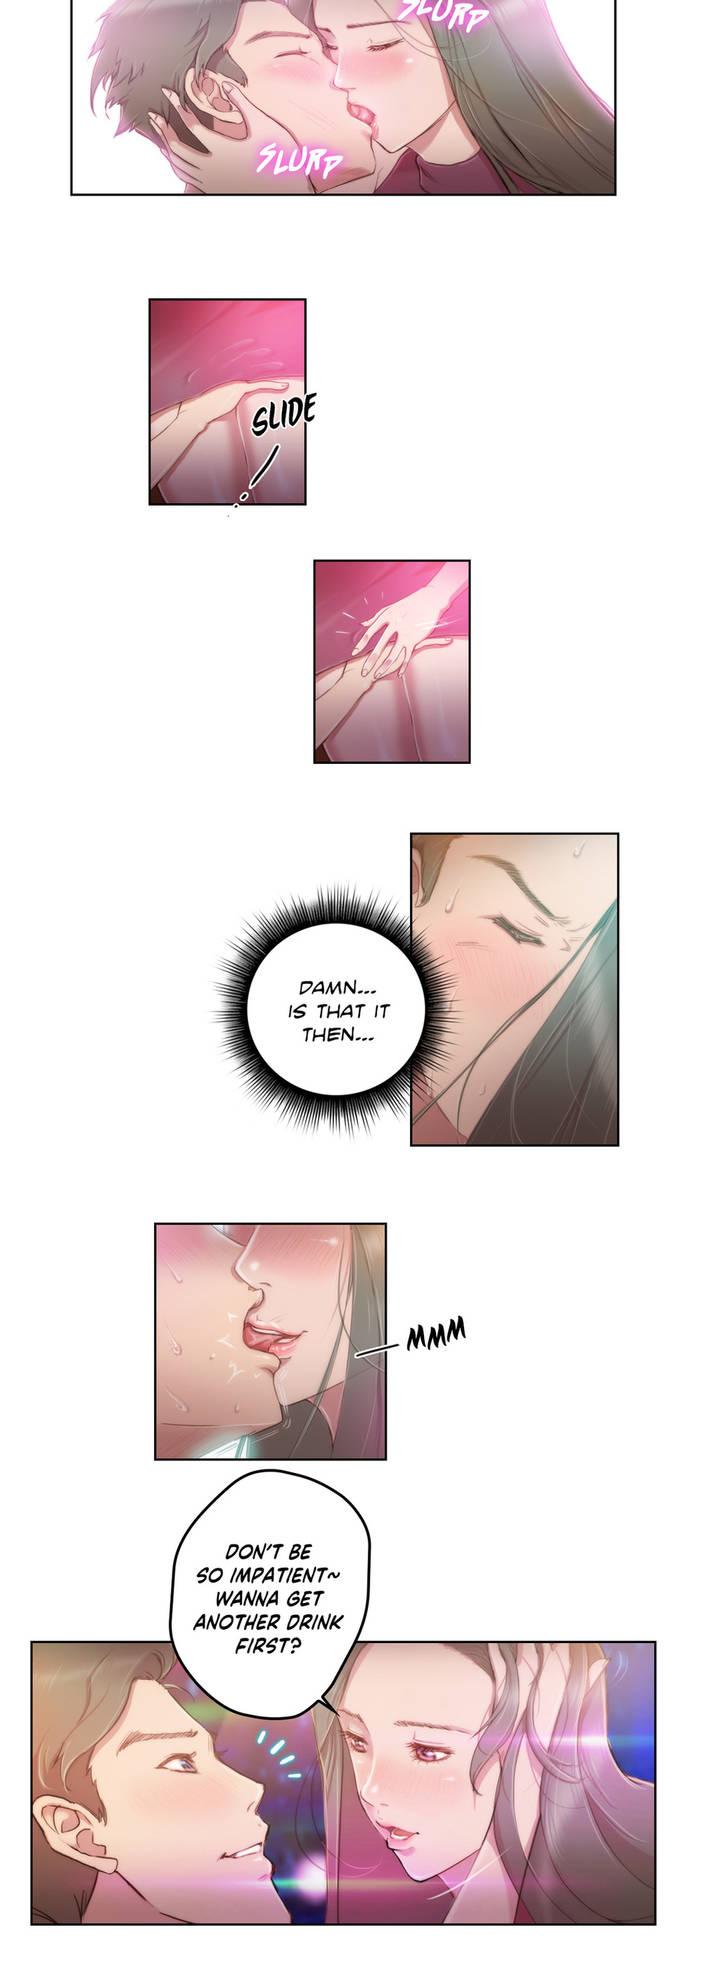 Red Head [BYMAN] Sex Knights-Erotic Sensuality & Perception Ch.1-12 (English) (Ongoing) Kiss - Page 4